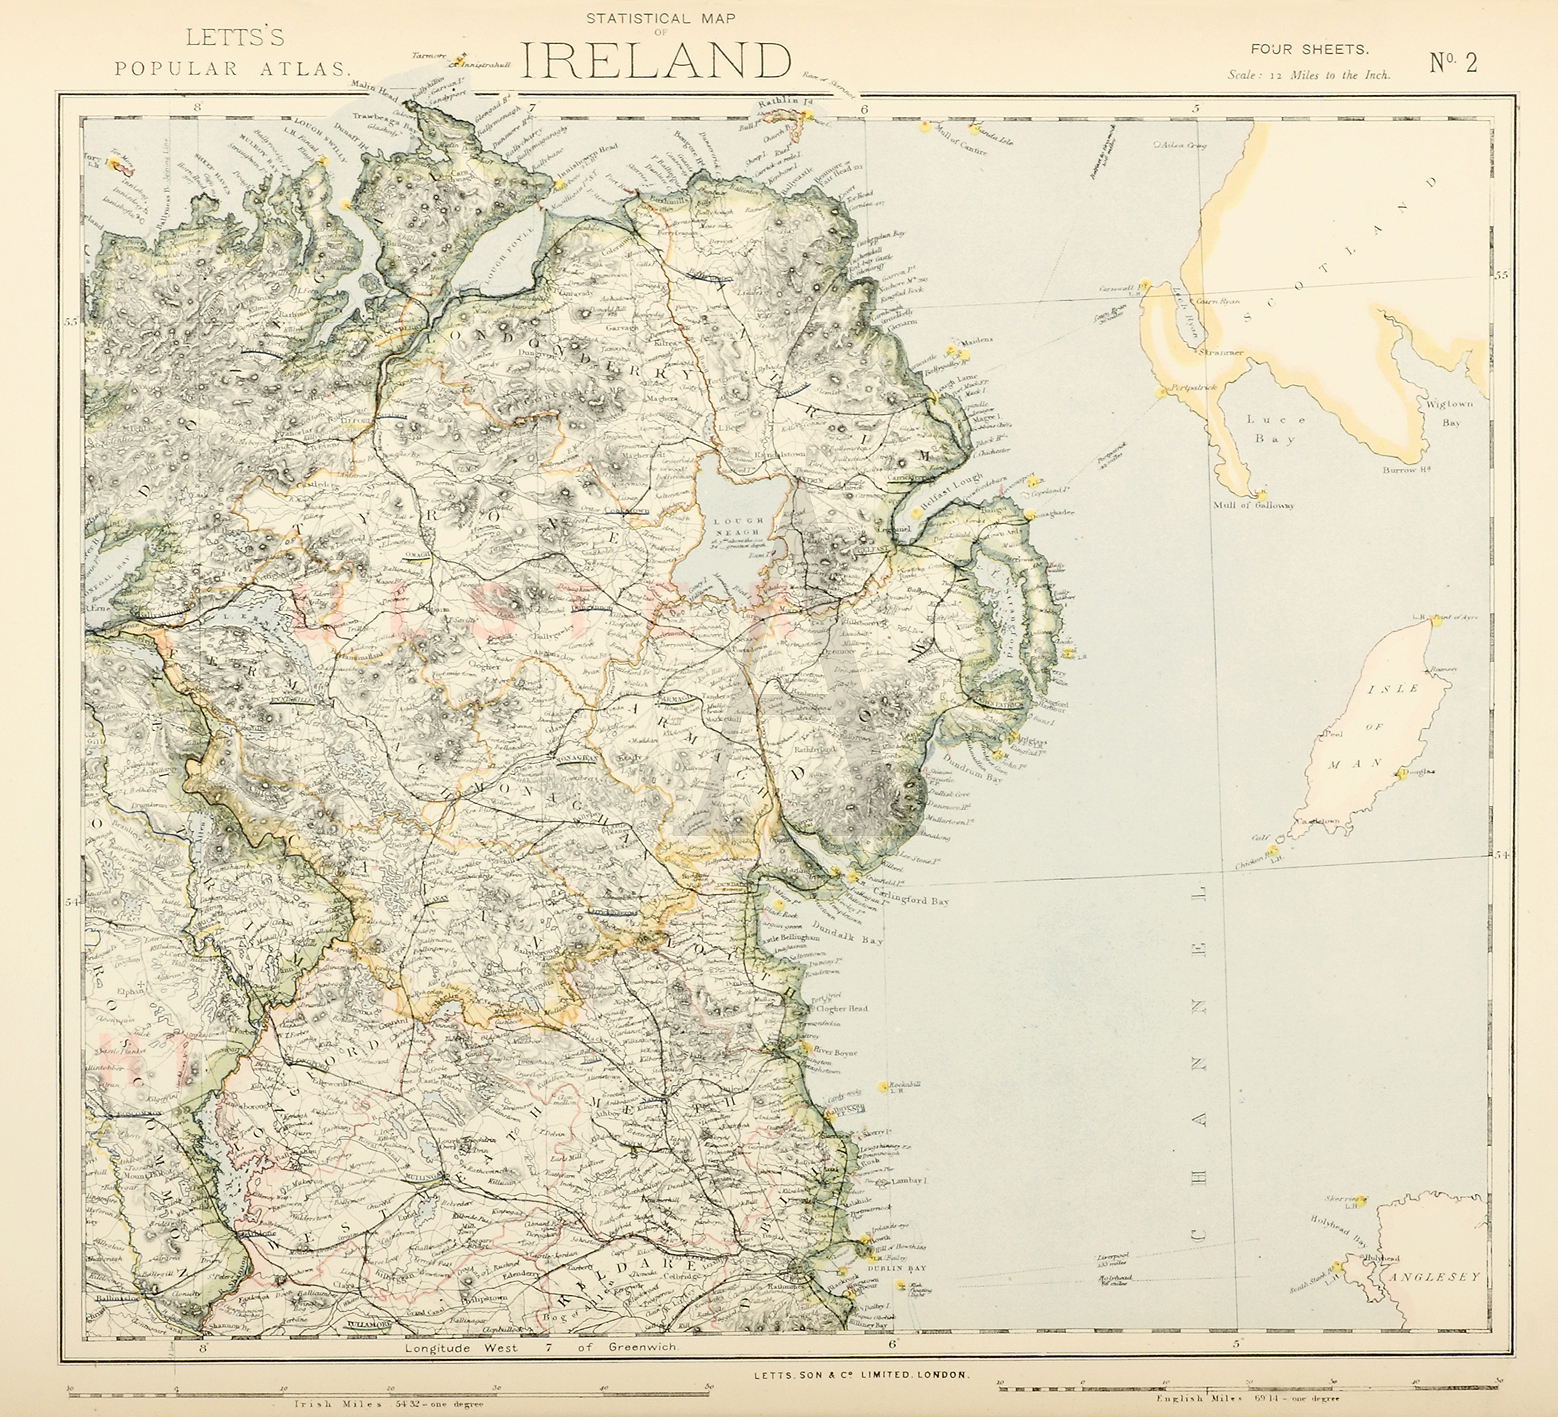 Statistical Map of Ireland No.2 - Antique Print from 1881